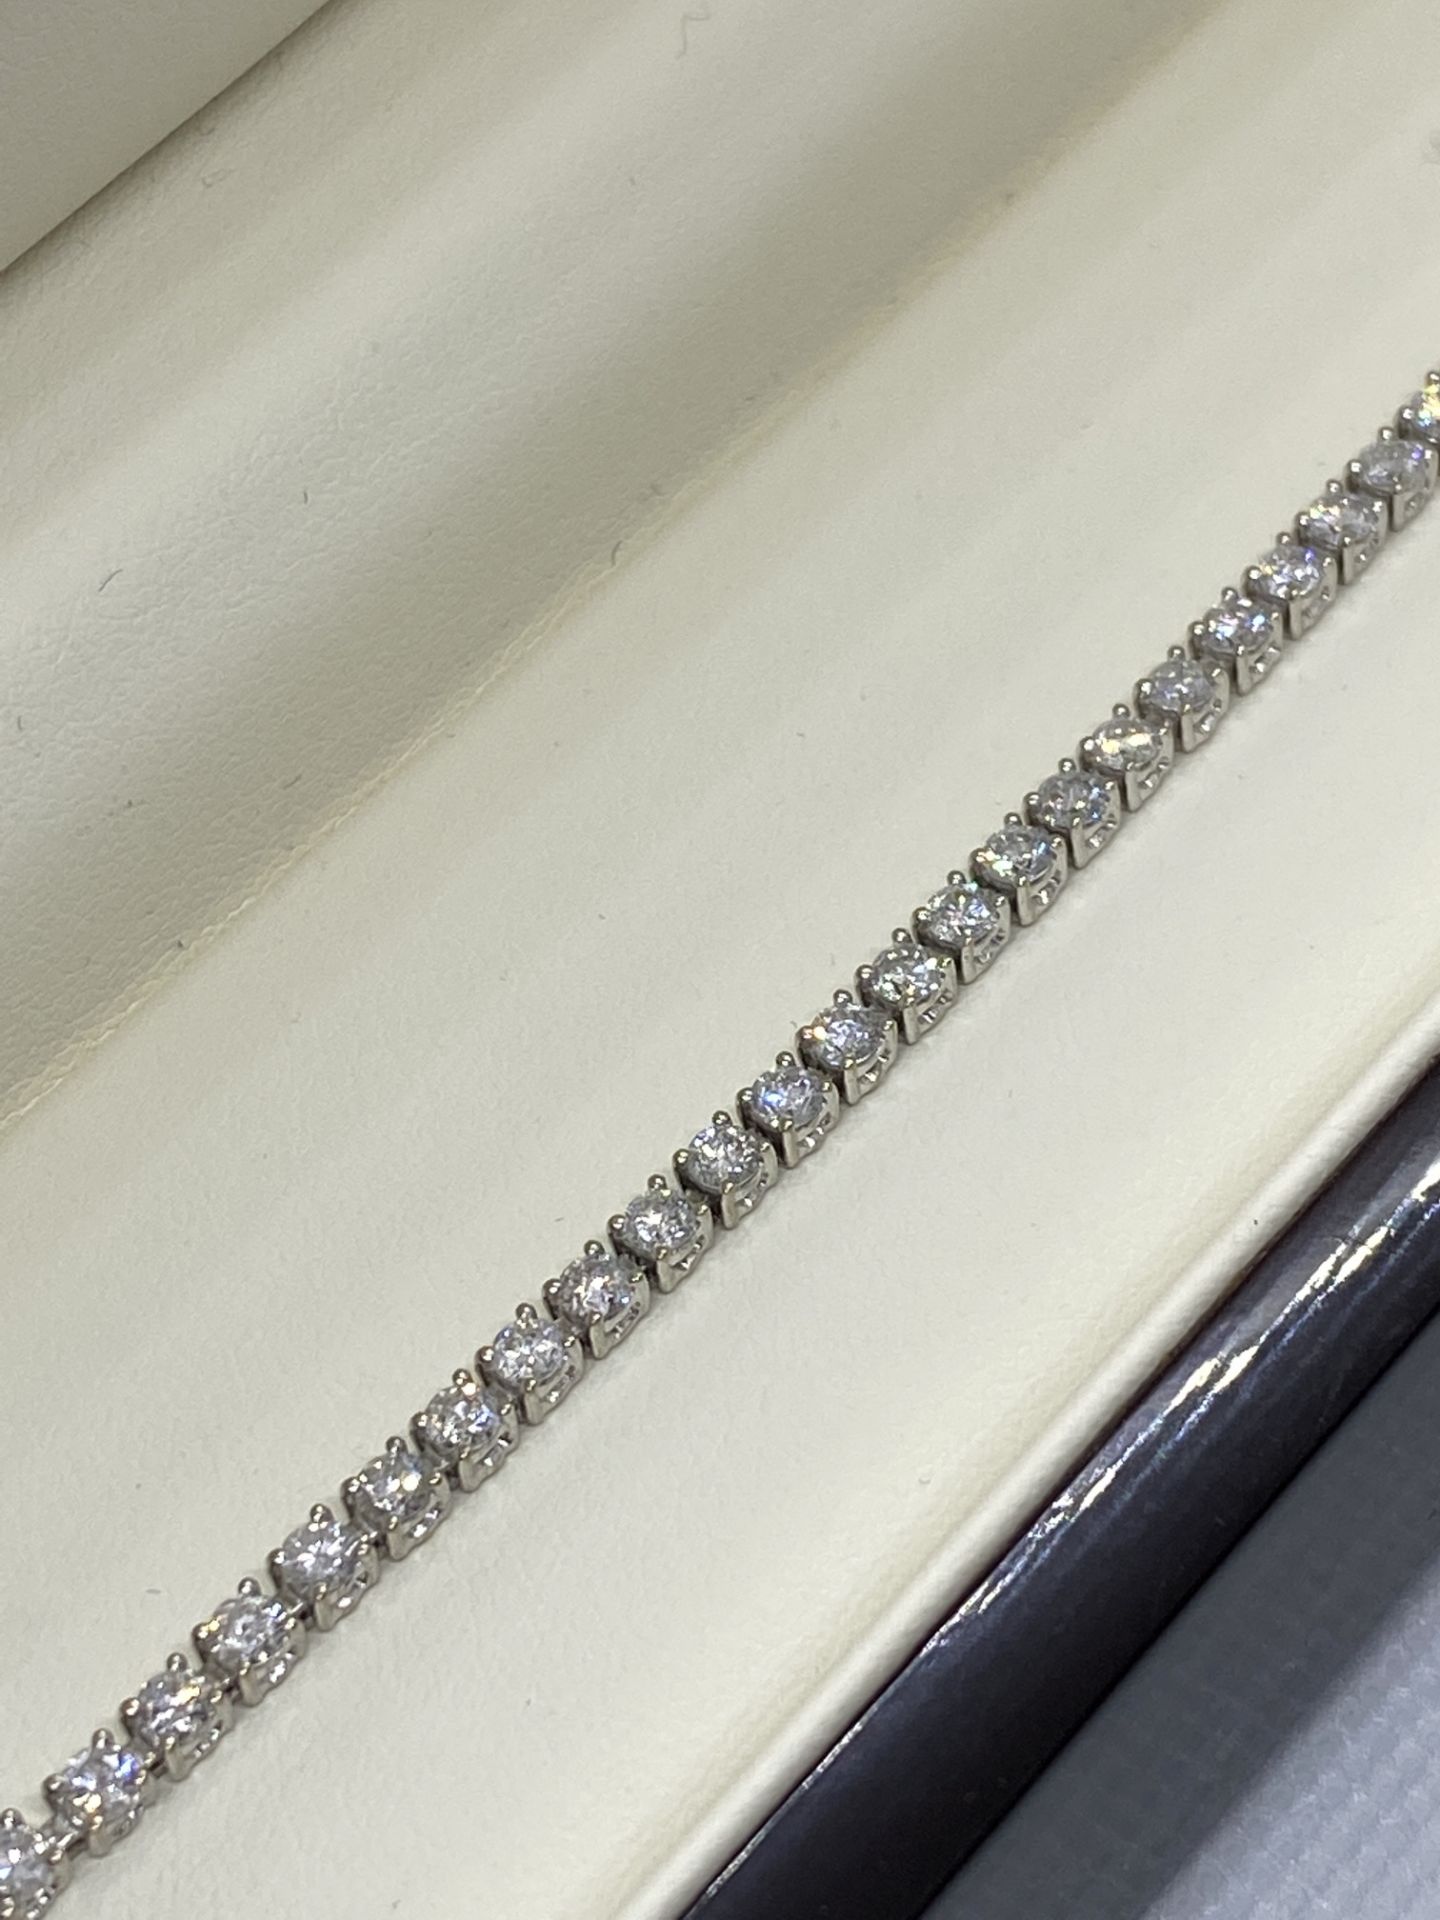 FABULOUS 4.20ct DIAMOND BRACELET SET IN WHITE GOLD - BEING SOLD TO HIGHEST BIDDER BY ORDER REF: 256 - Image 2 of 5